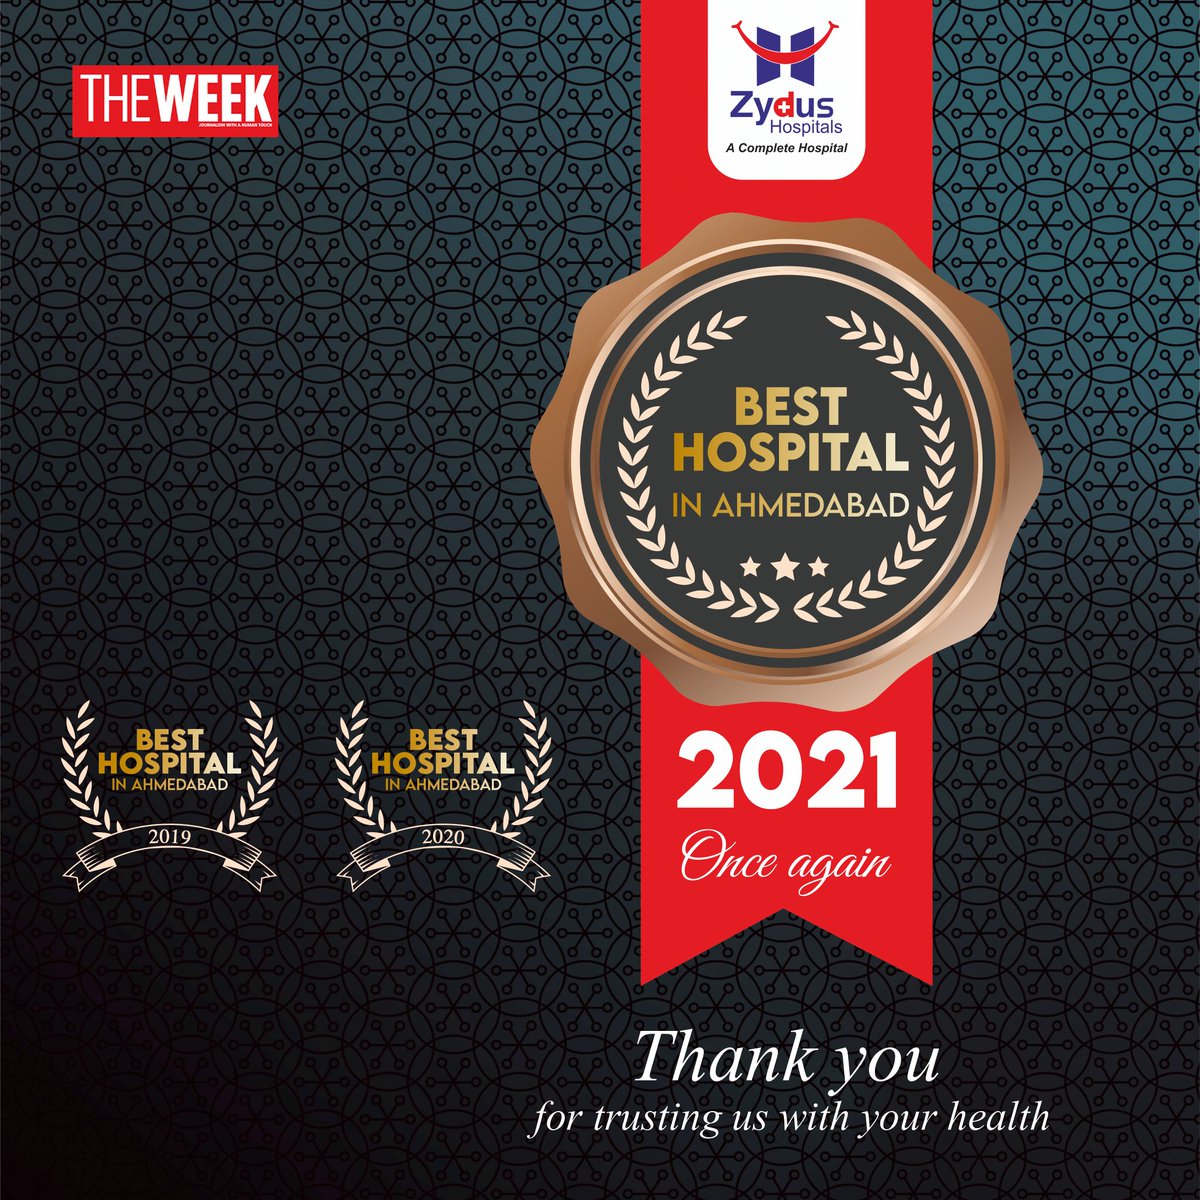 It gives us a lot of joy sharing that Zydus Hospital has been reckoned & awarded as the best hospital in Ahmedabad, third time in a row - by The Week.
Thanking all our patrons for the constant love and support.

#ThankYou #ZydusHospital #BestHospitalInAhmedabad #BestHospital https://t.co/A1N6VxvX1n